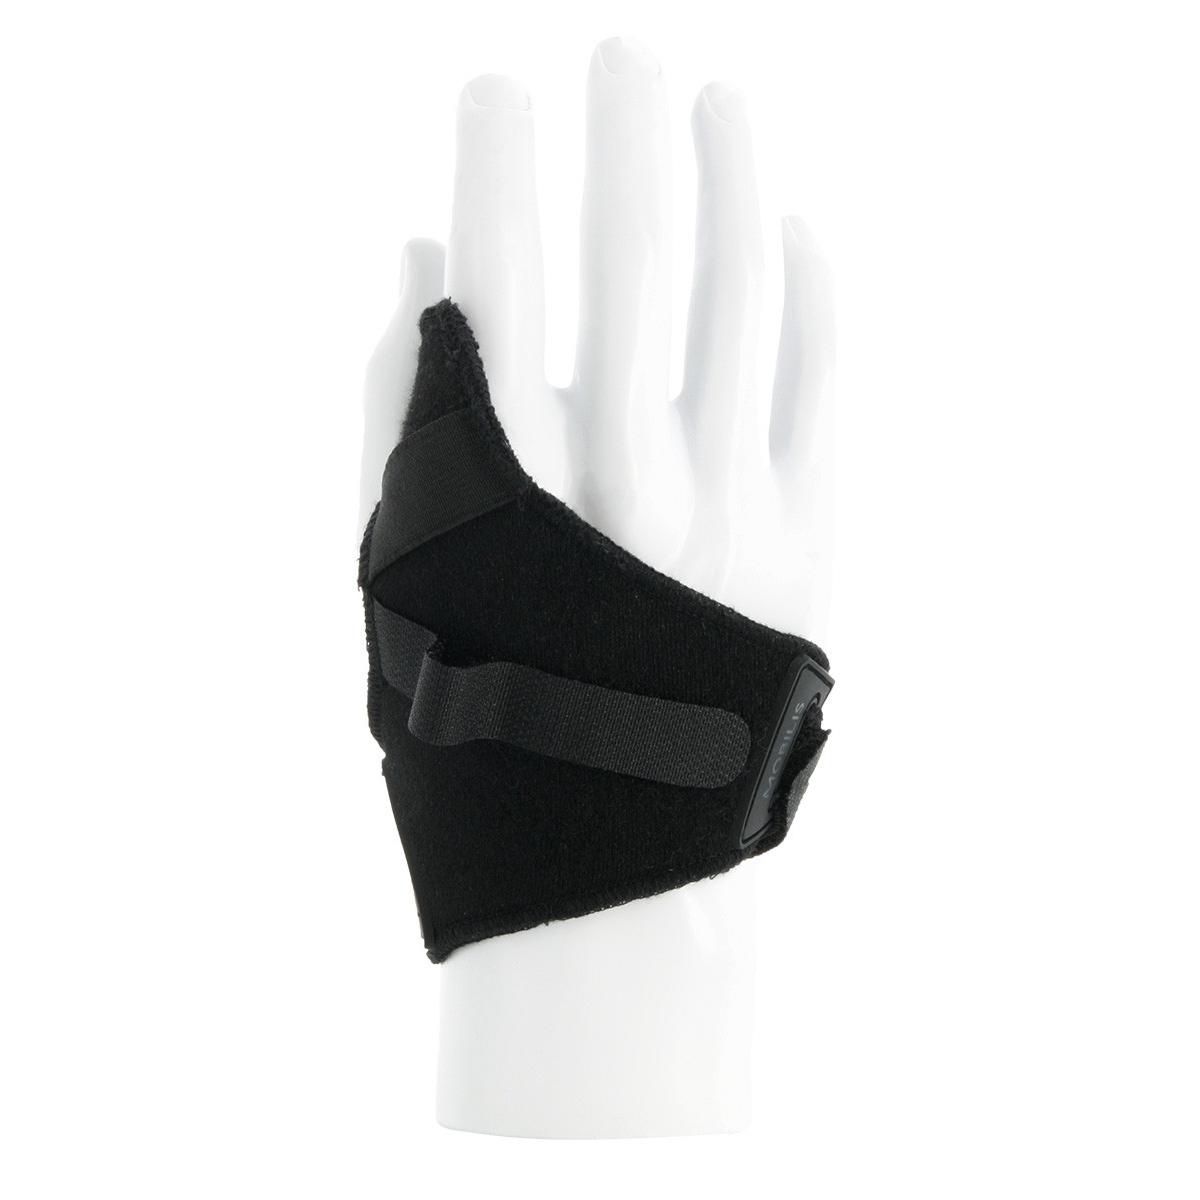 Mobilis 001087 W128866798 Universal Glove for Wearable 